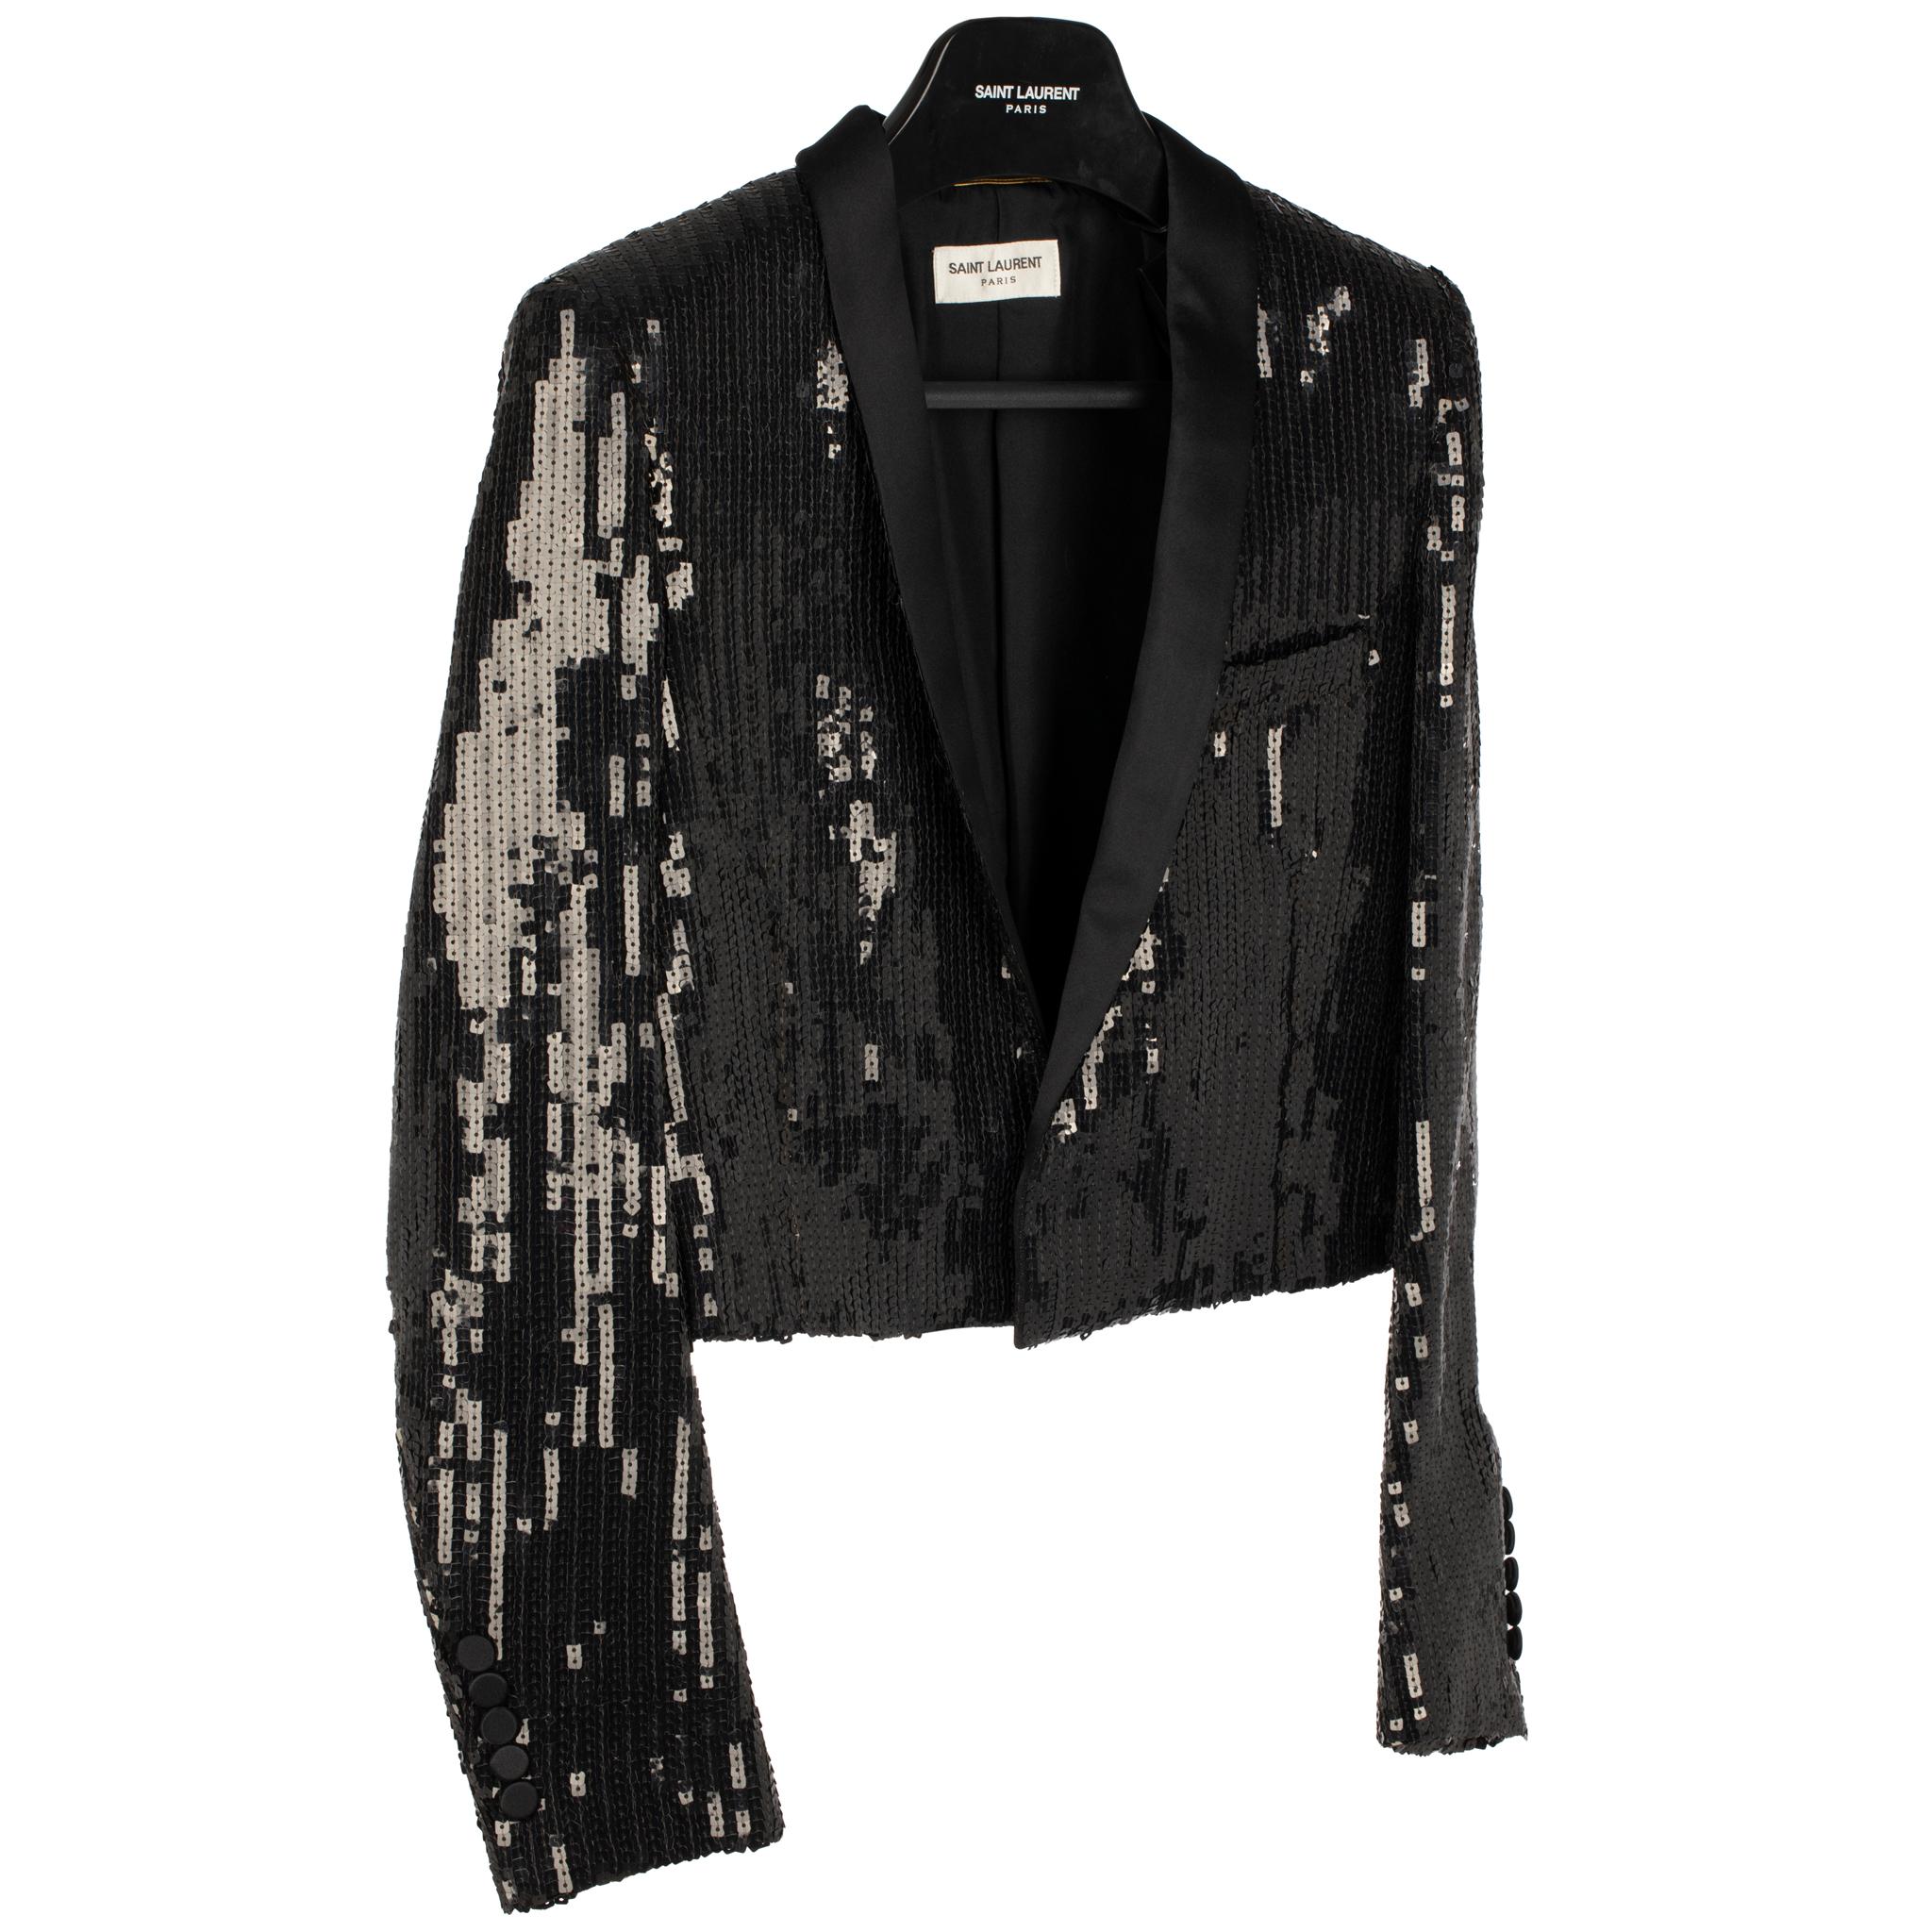 Make a bold statement with this Yves Saint Laurent evening crop jacket. Cut in a black sequin fabric, it adds a touch of style to your night on the town. Completely lined, this blazer is sure to be your go-to for your next formal